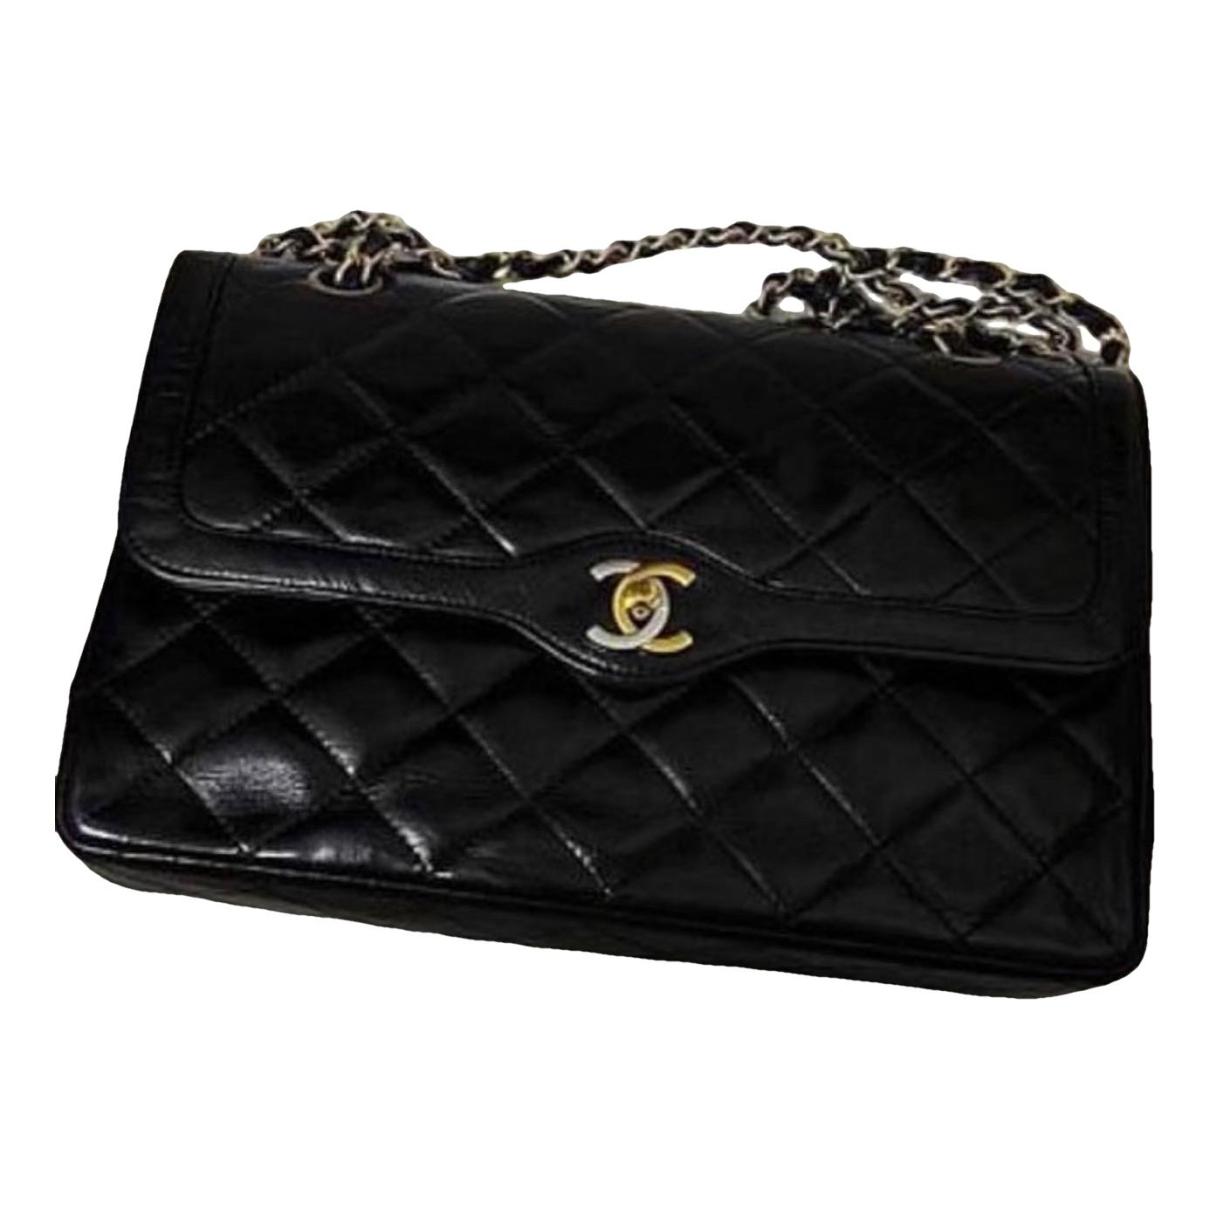 Chanel White Leather vintage Diana Flap Bag Chanel